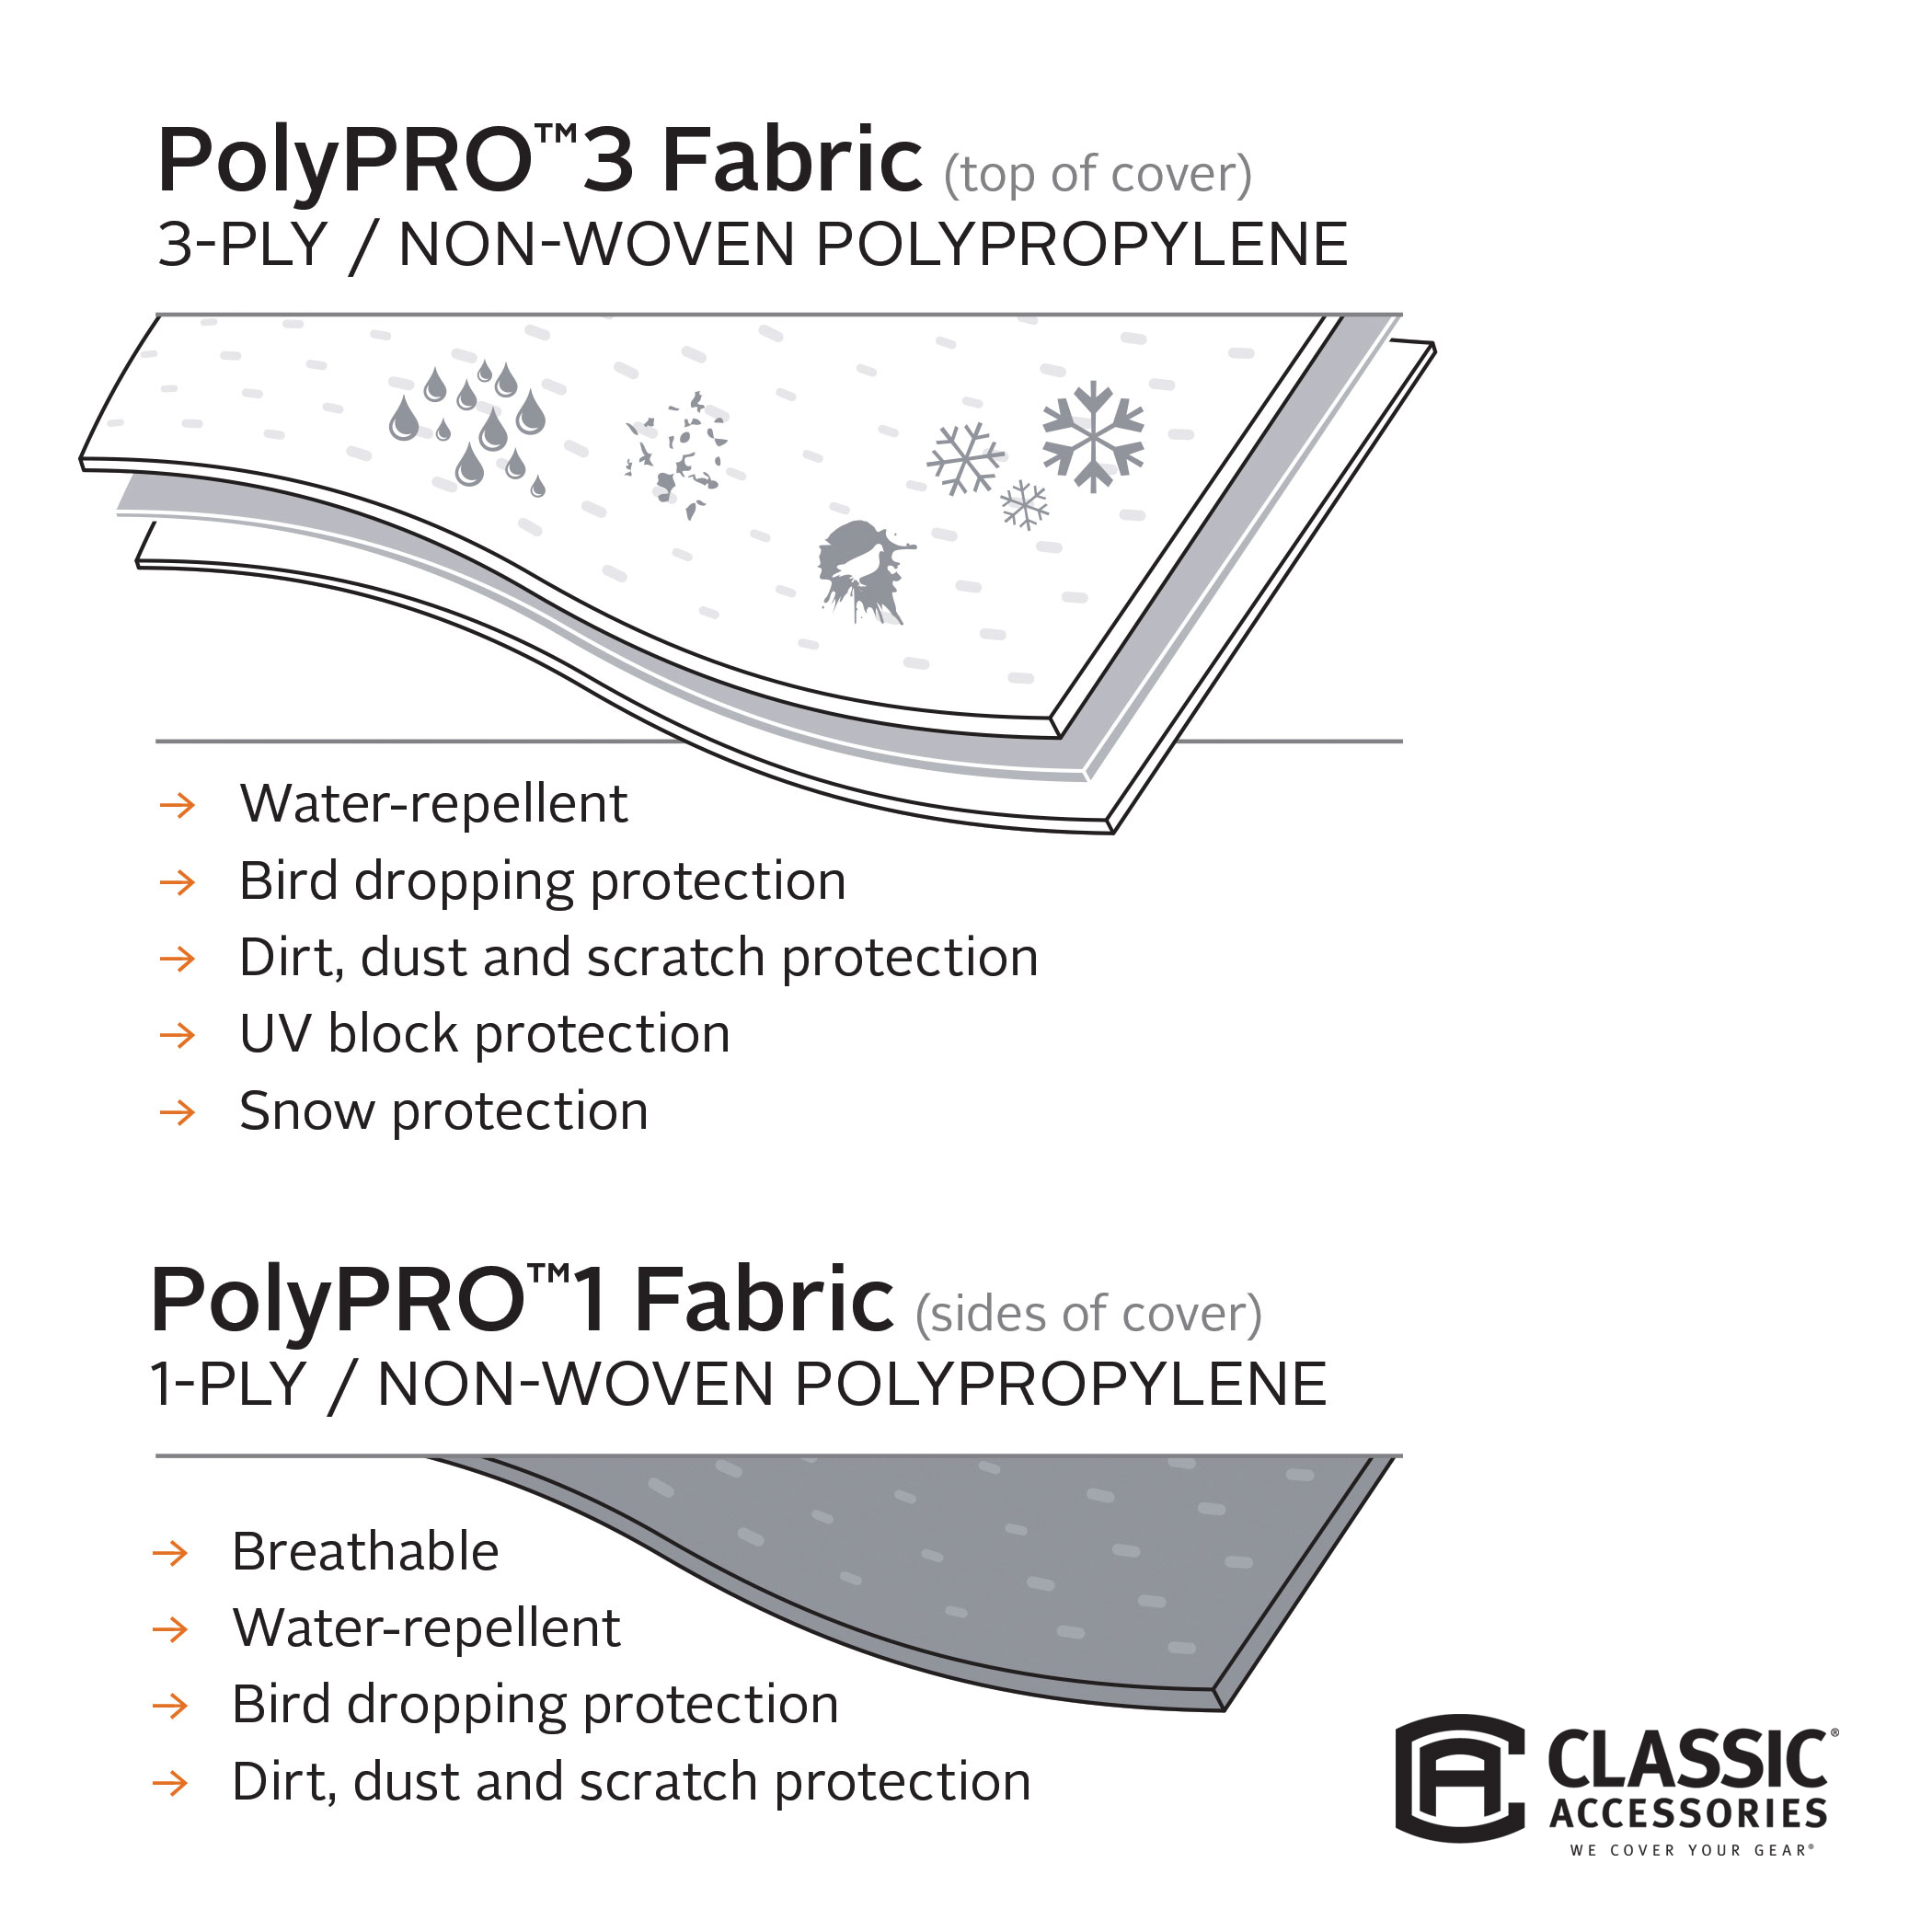 Classic Accessories OverDrive PolyPRO 3 Deluxe Class A RV Cover, Fits 24' - 28' RVs - Max Weather Protection with 3-Ply Poly Fabric Roof RV Cover (Model 3) - image 5 of 7